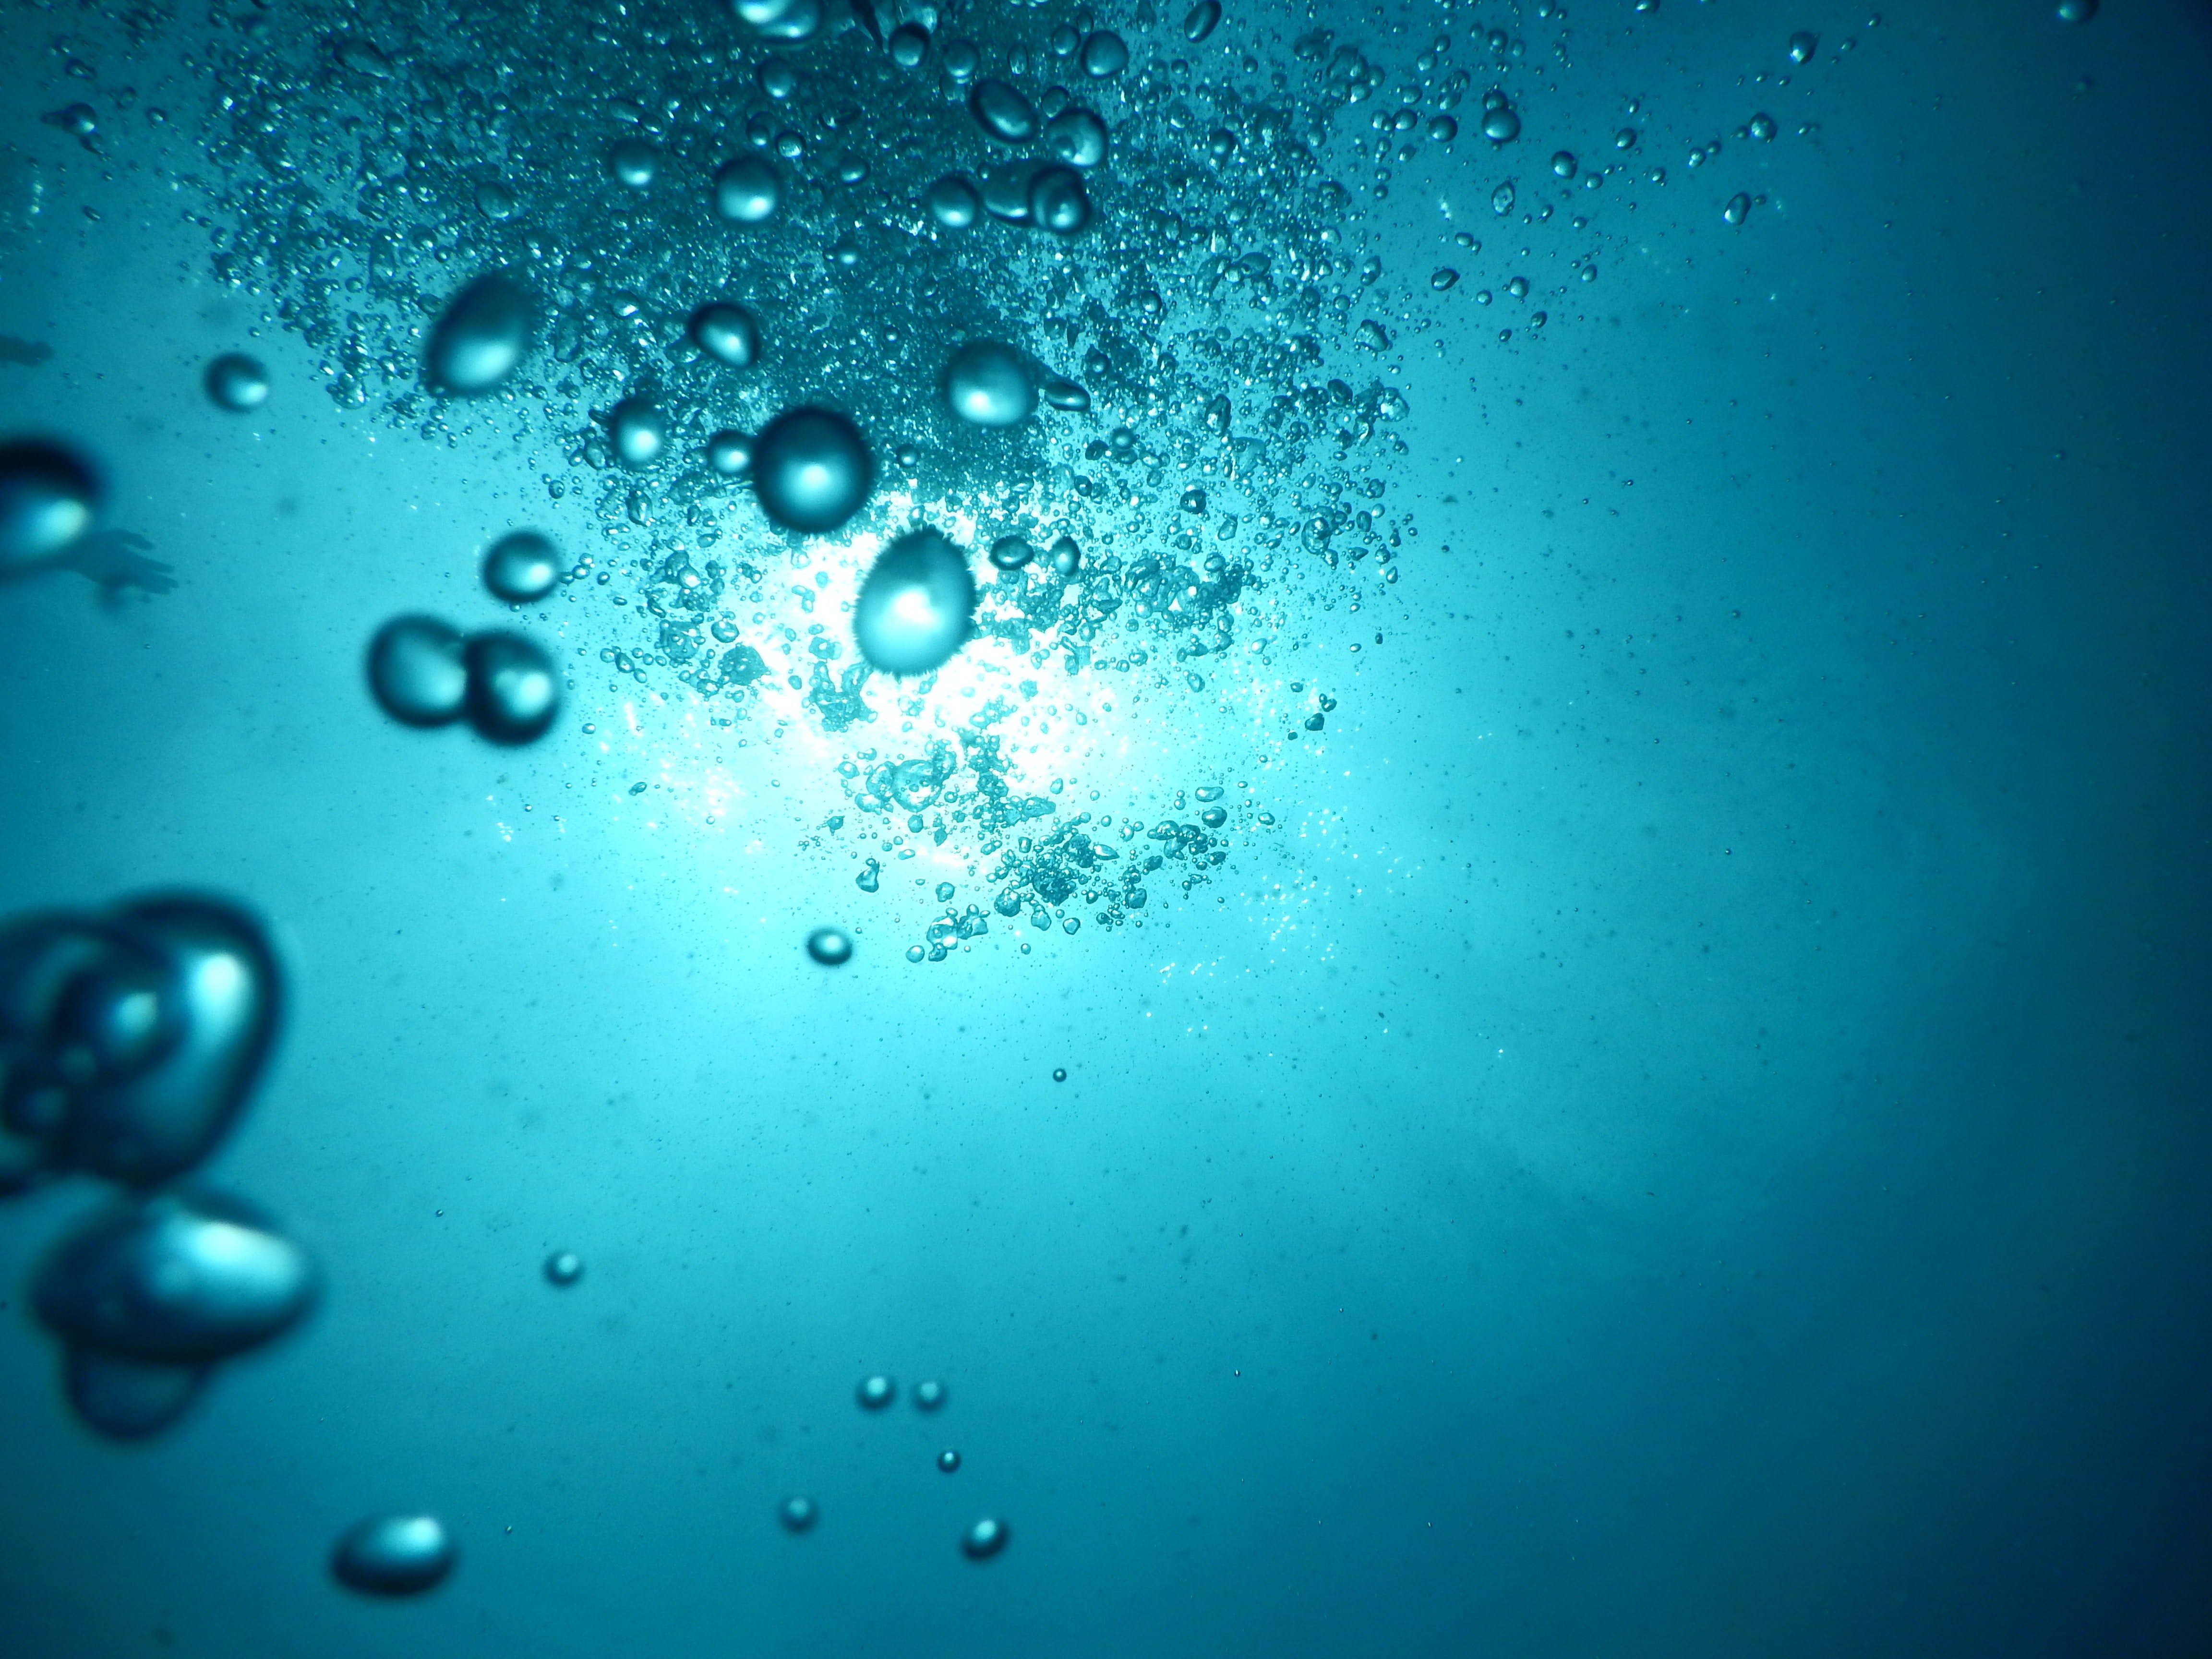 Spiritual Symbolism of Bubbles in Water